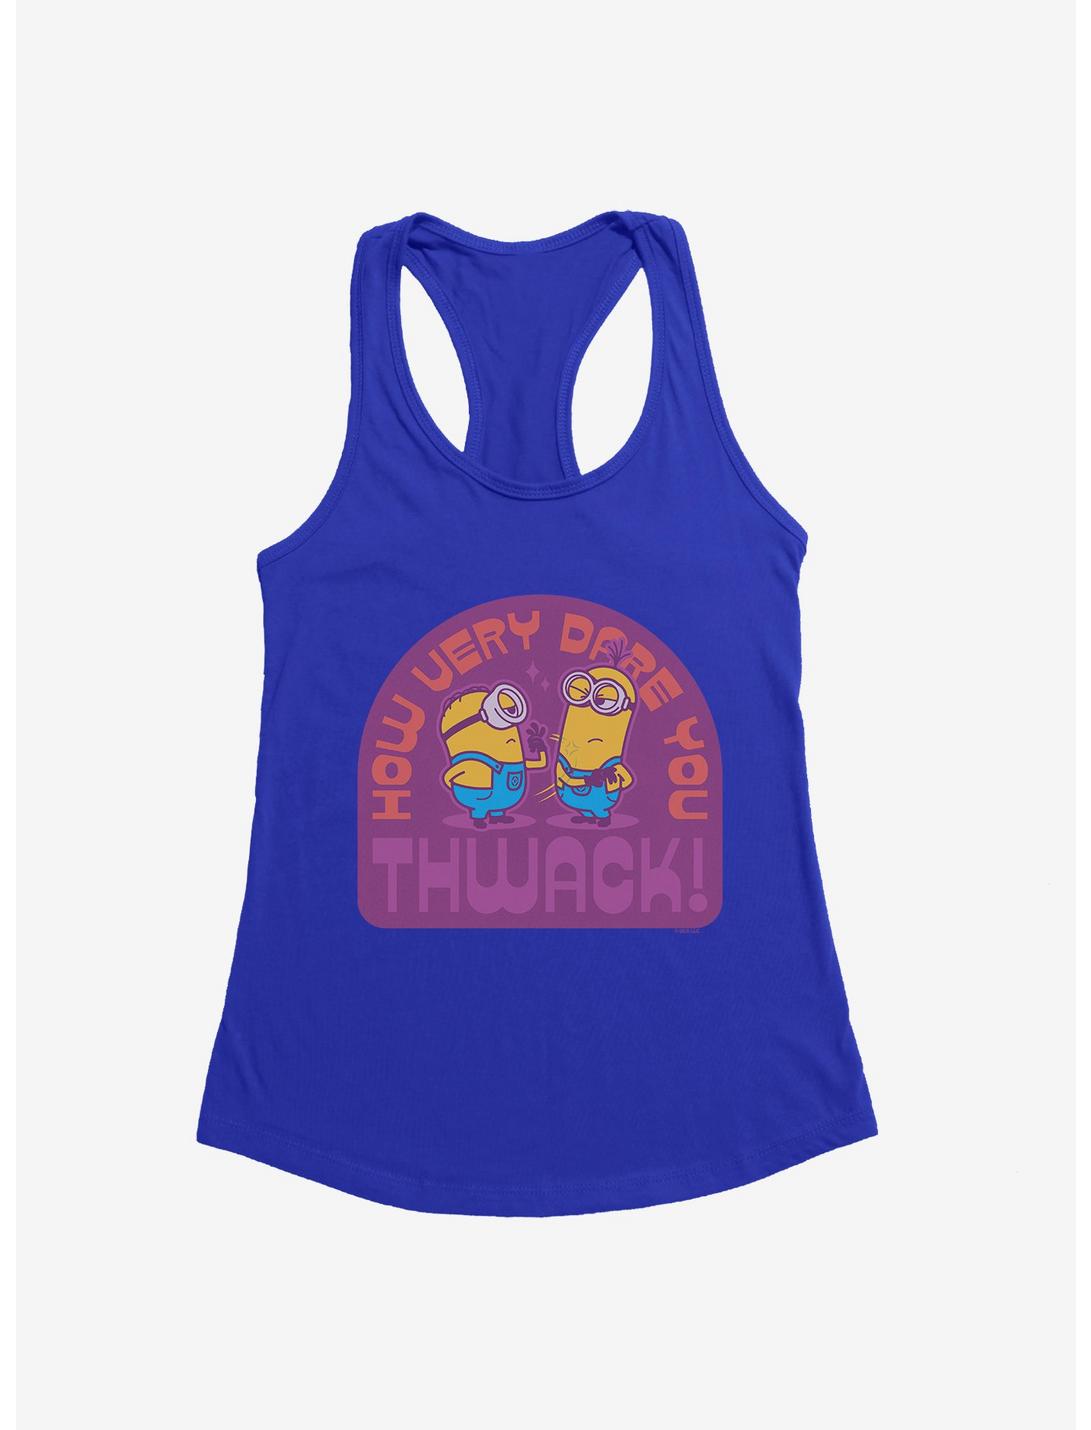 Minions Vintage How Dare You Girls Tank, ROYAL, hi-res